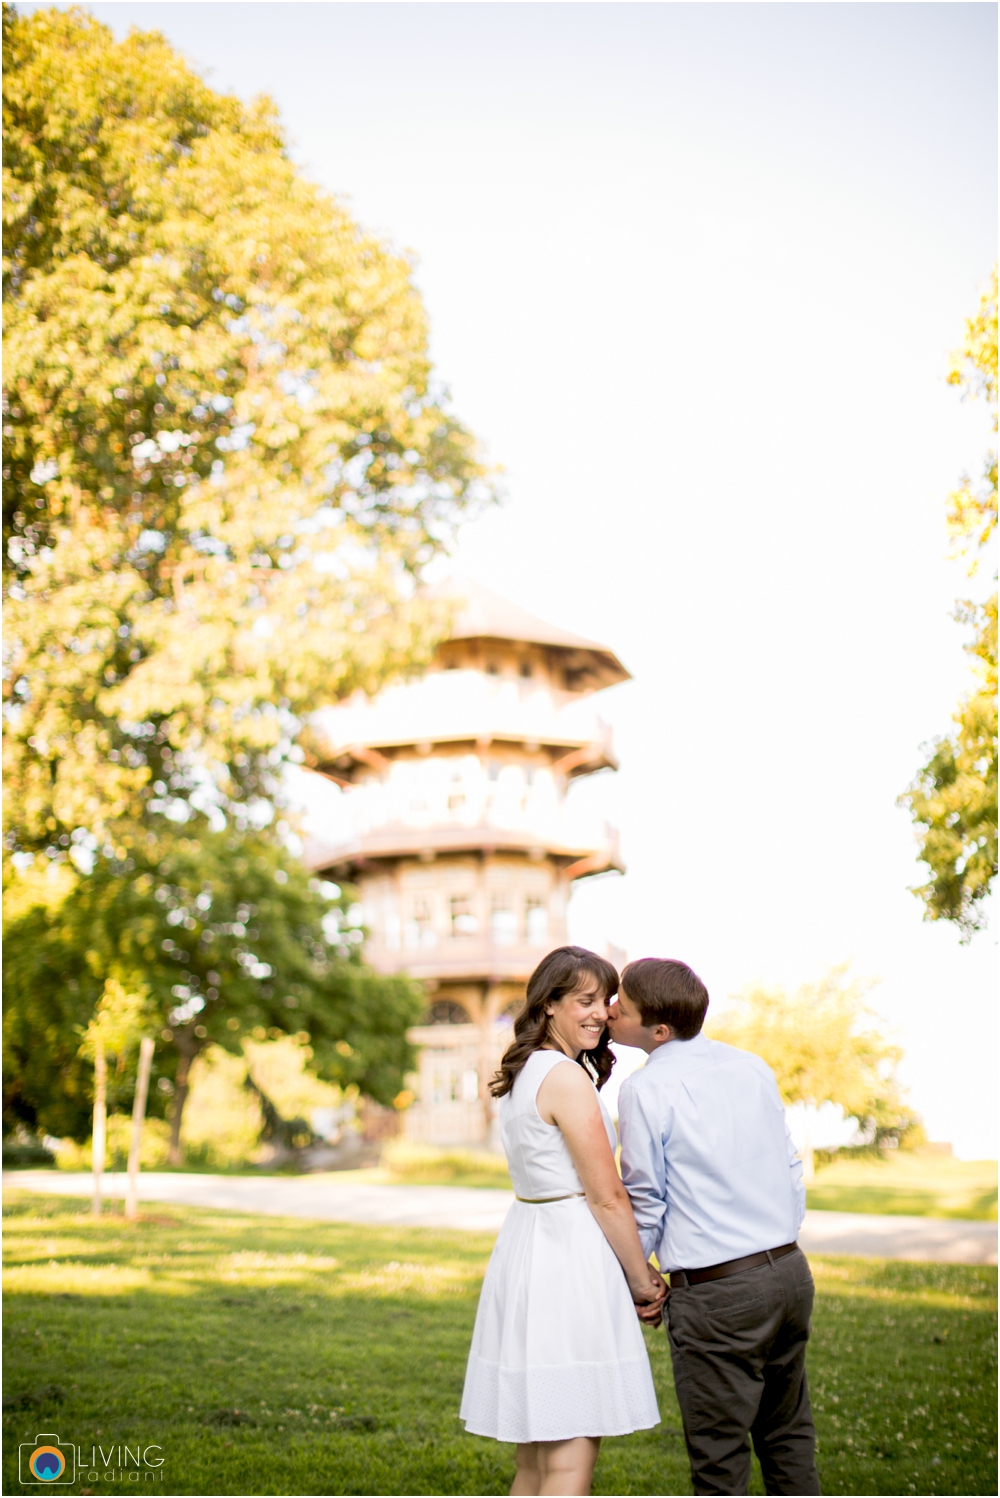 eva-dave-engaged-patterson-park-baltimore-downtown-living-radiant-photography-photos_0019.jpg